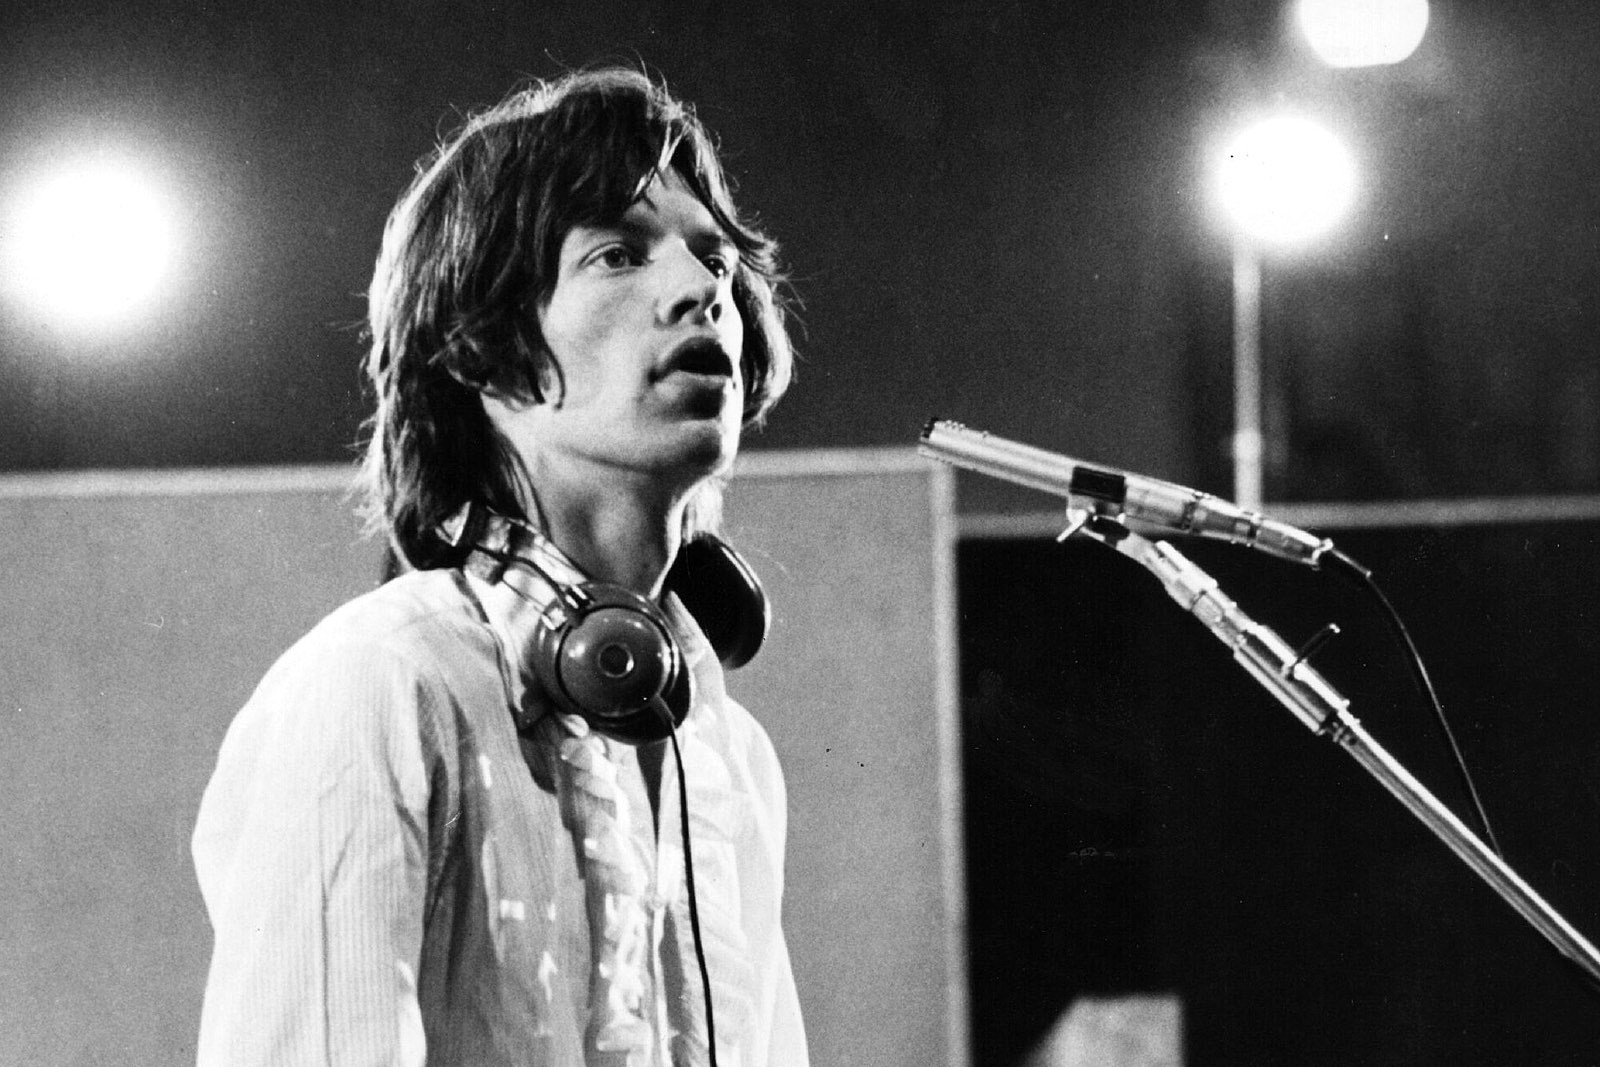 Rolling Stones 'Sympathy for the Devil' Film Re-Released for 50th